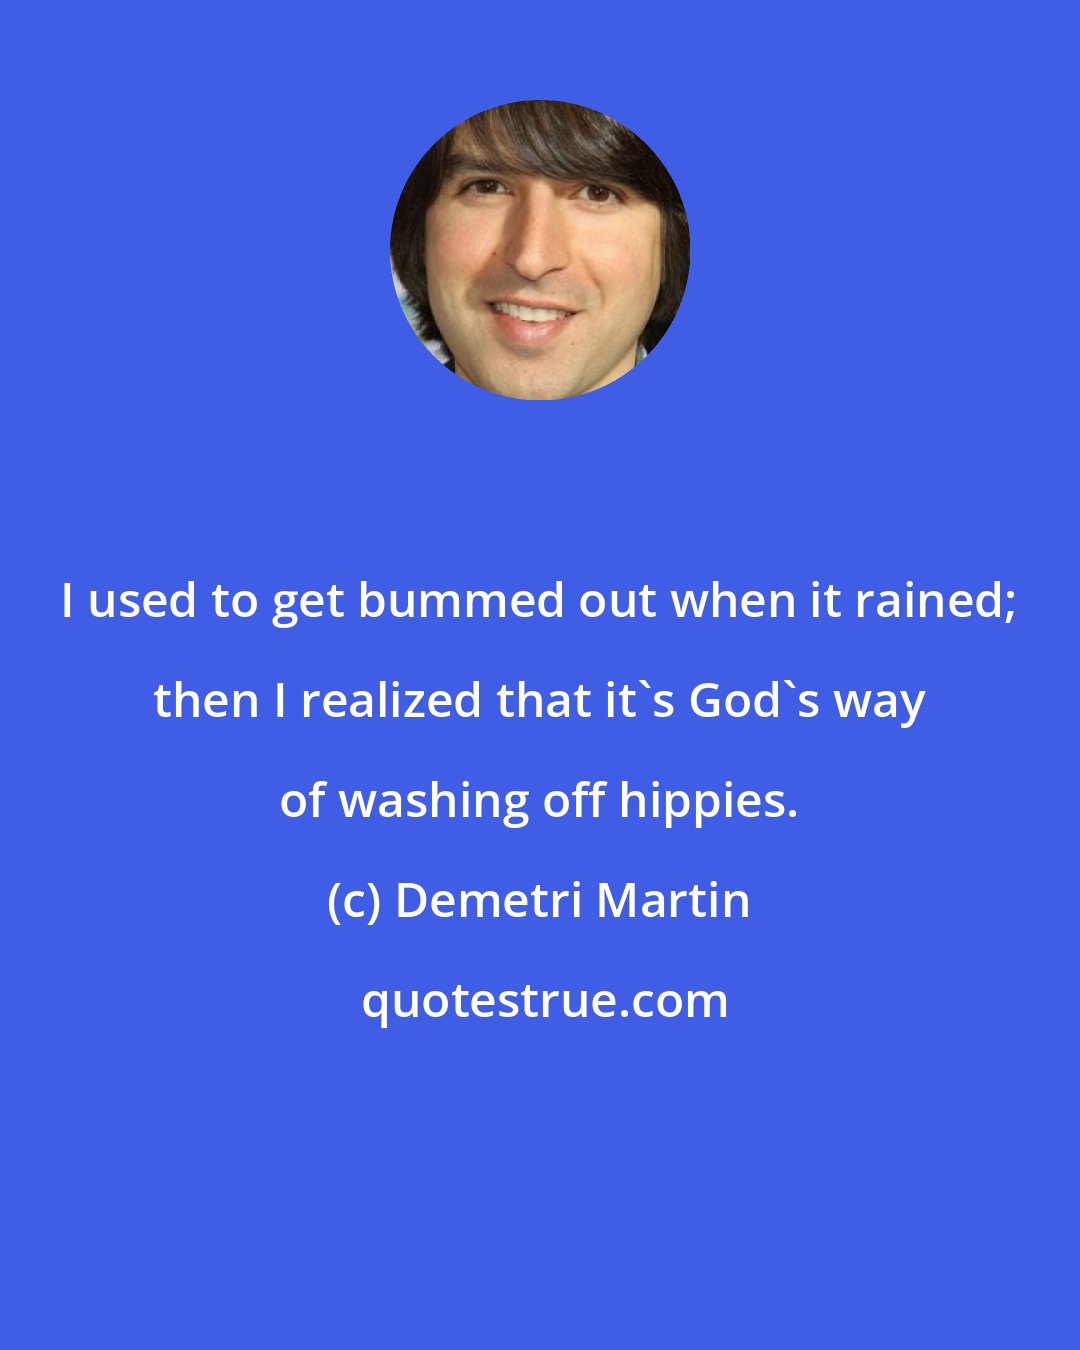 Demetri Martin: I used to get bummed out when it rained; then I realized that it's God's way of washing off hippies.